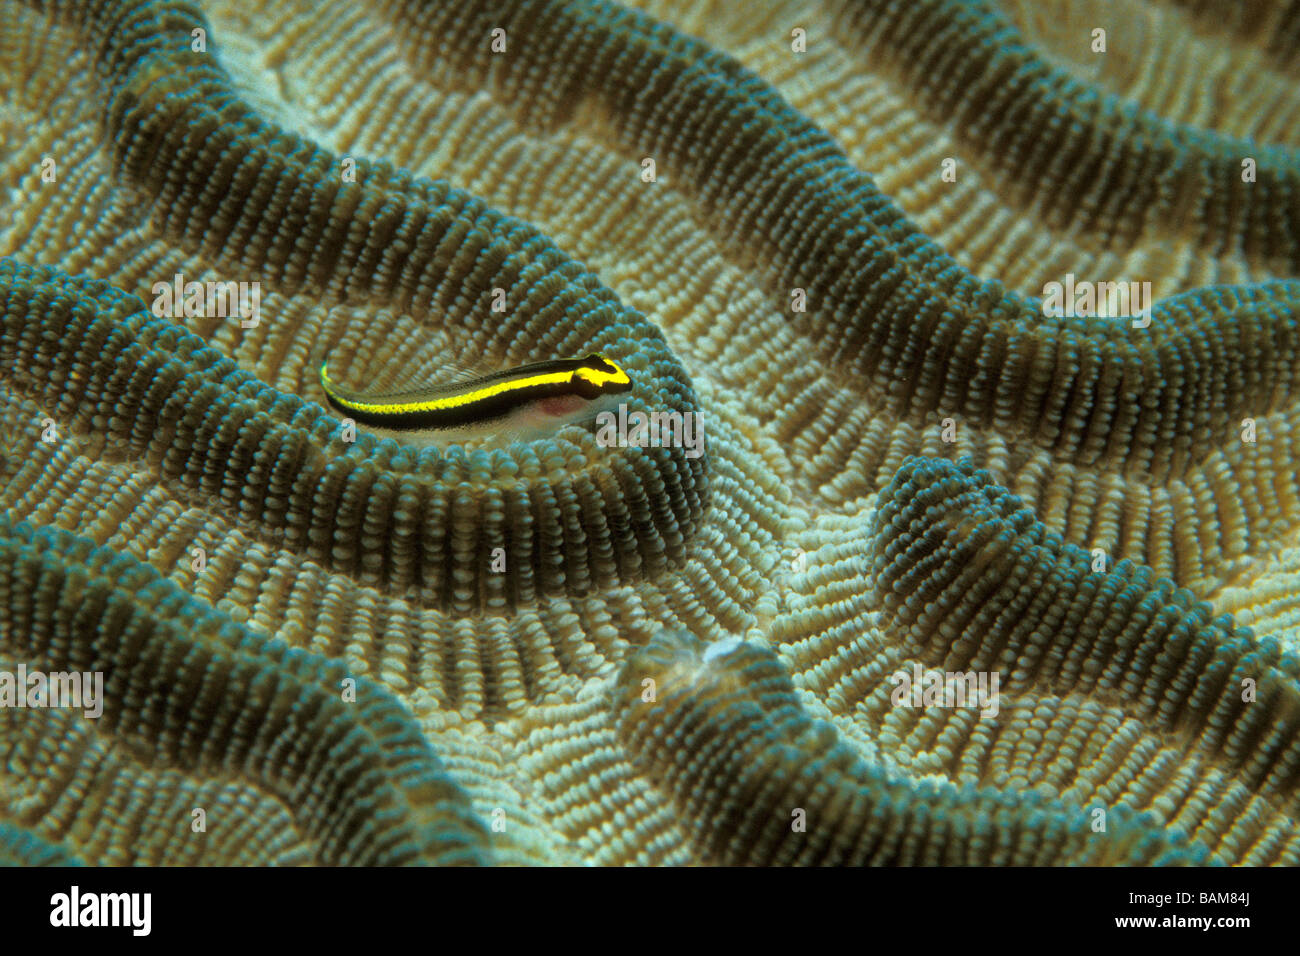 Cleaning Goby on Coral Gobiosoma genie Caribbean Cuba Stock Photo